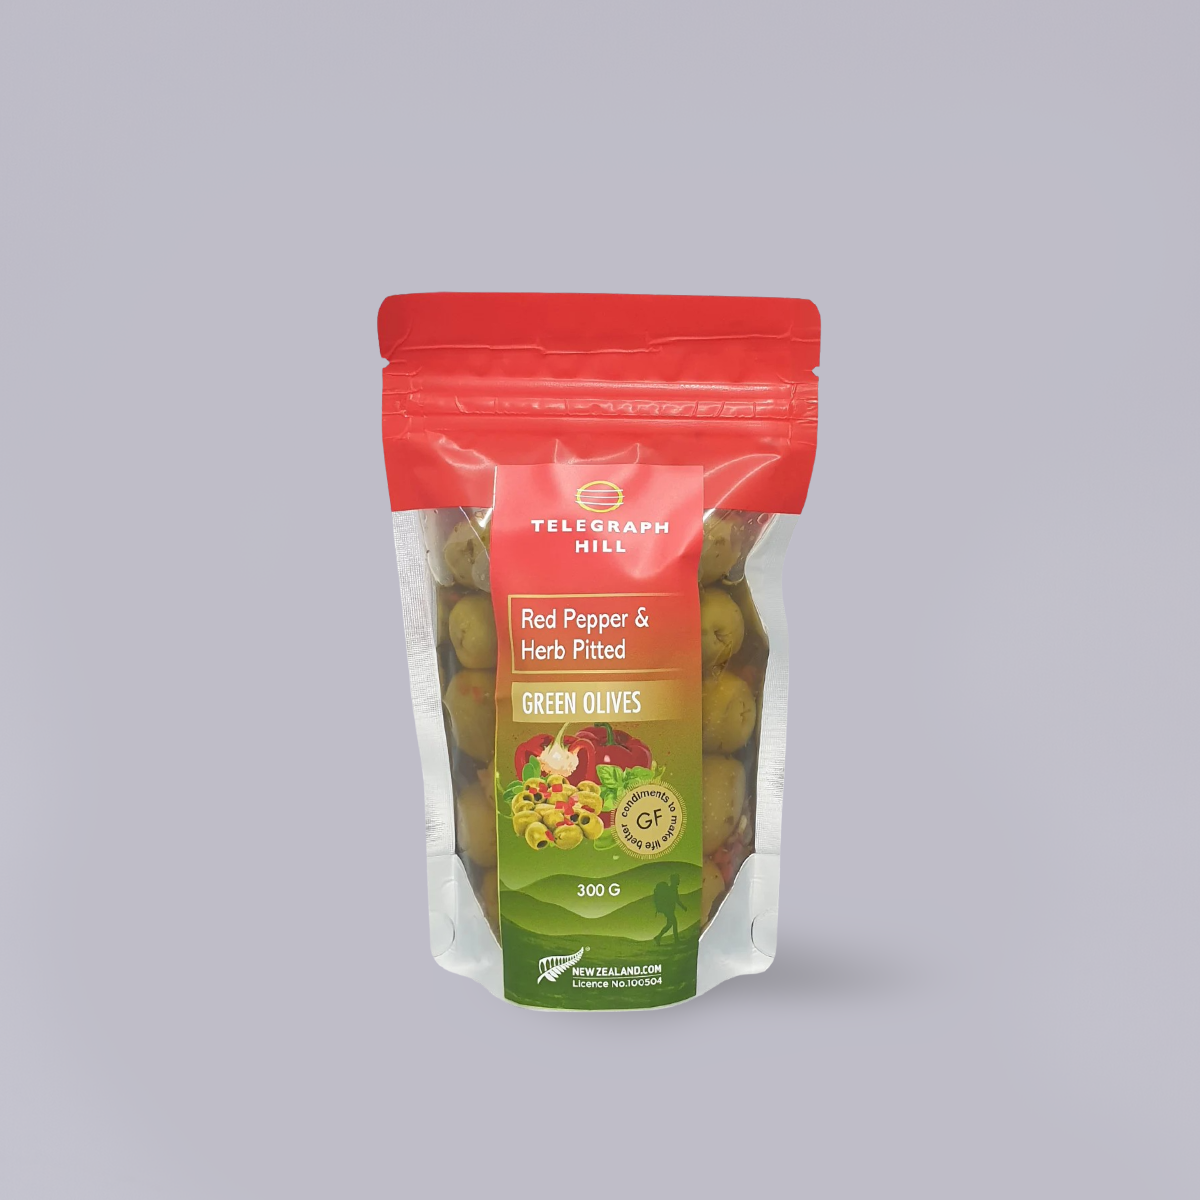 Telegraph Hill | Red Pepper & Herb Pitted Green Olives | 300g